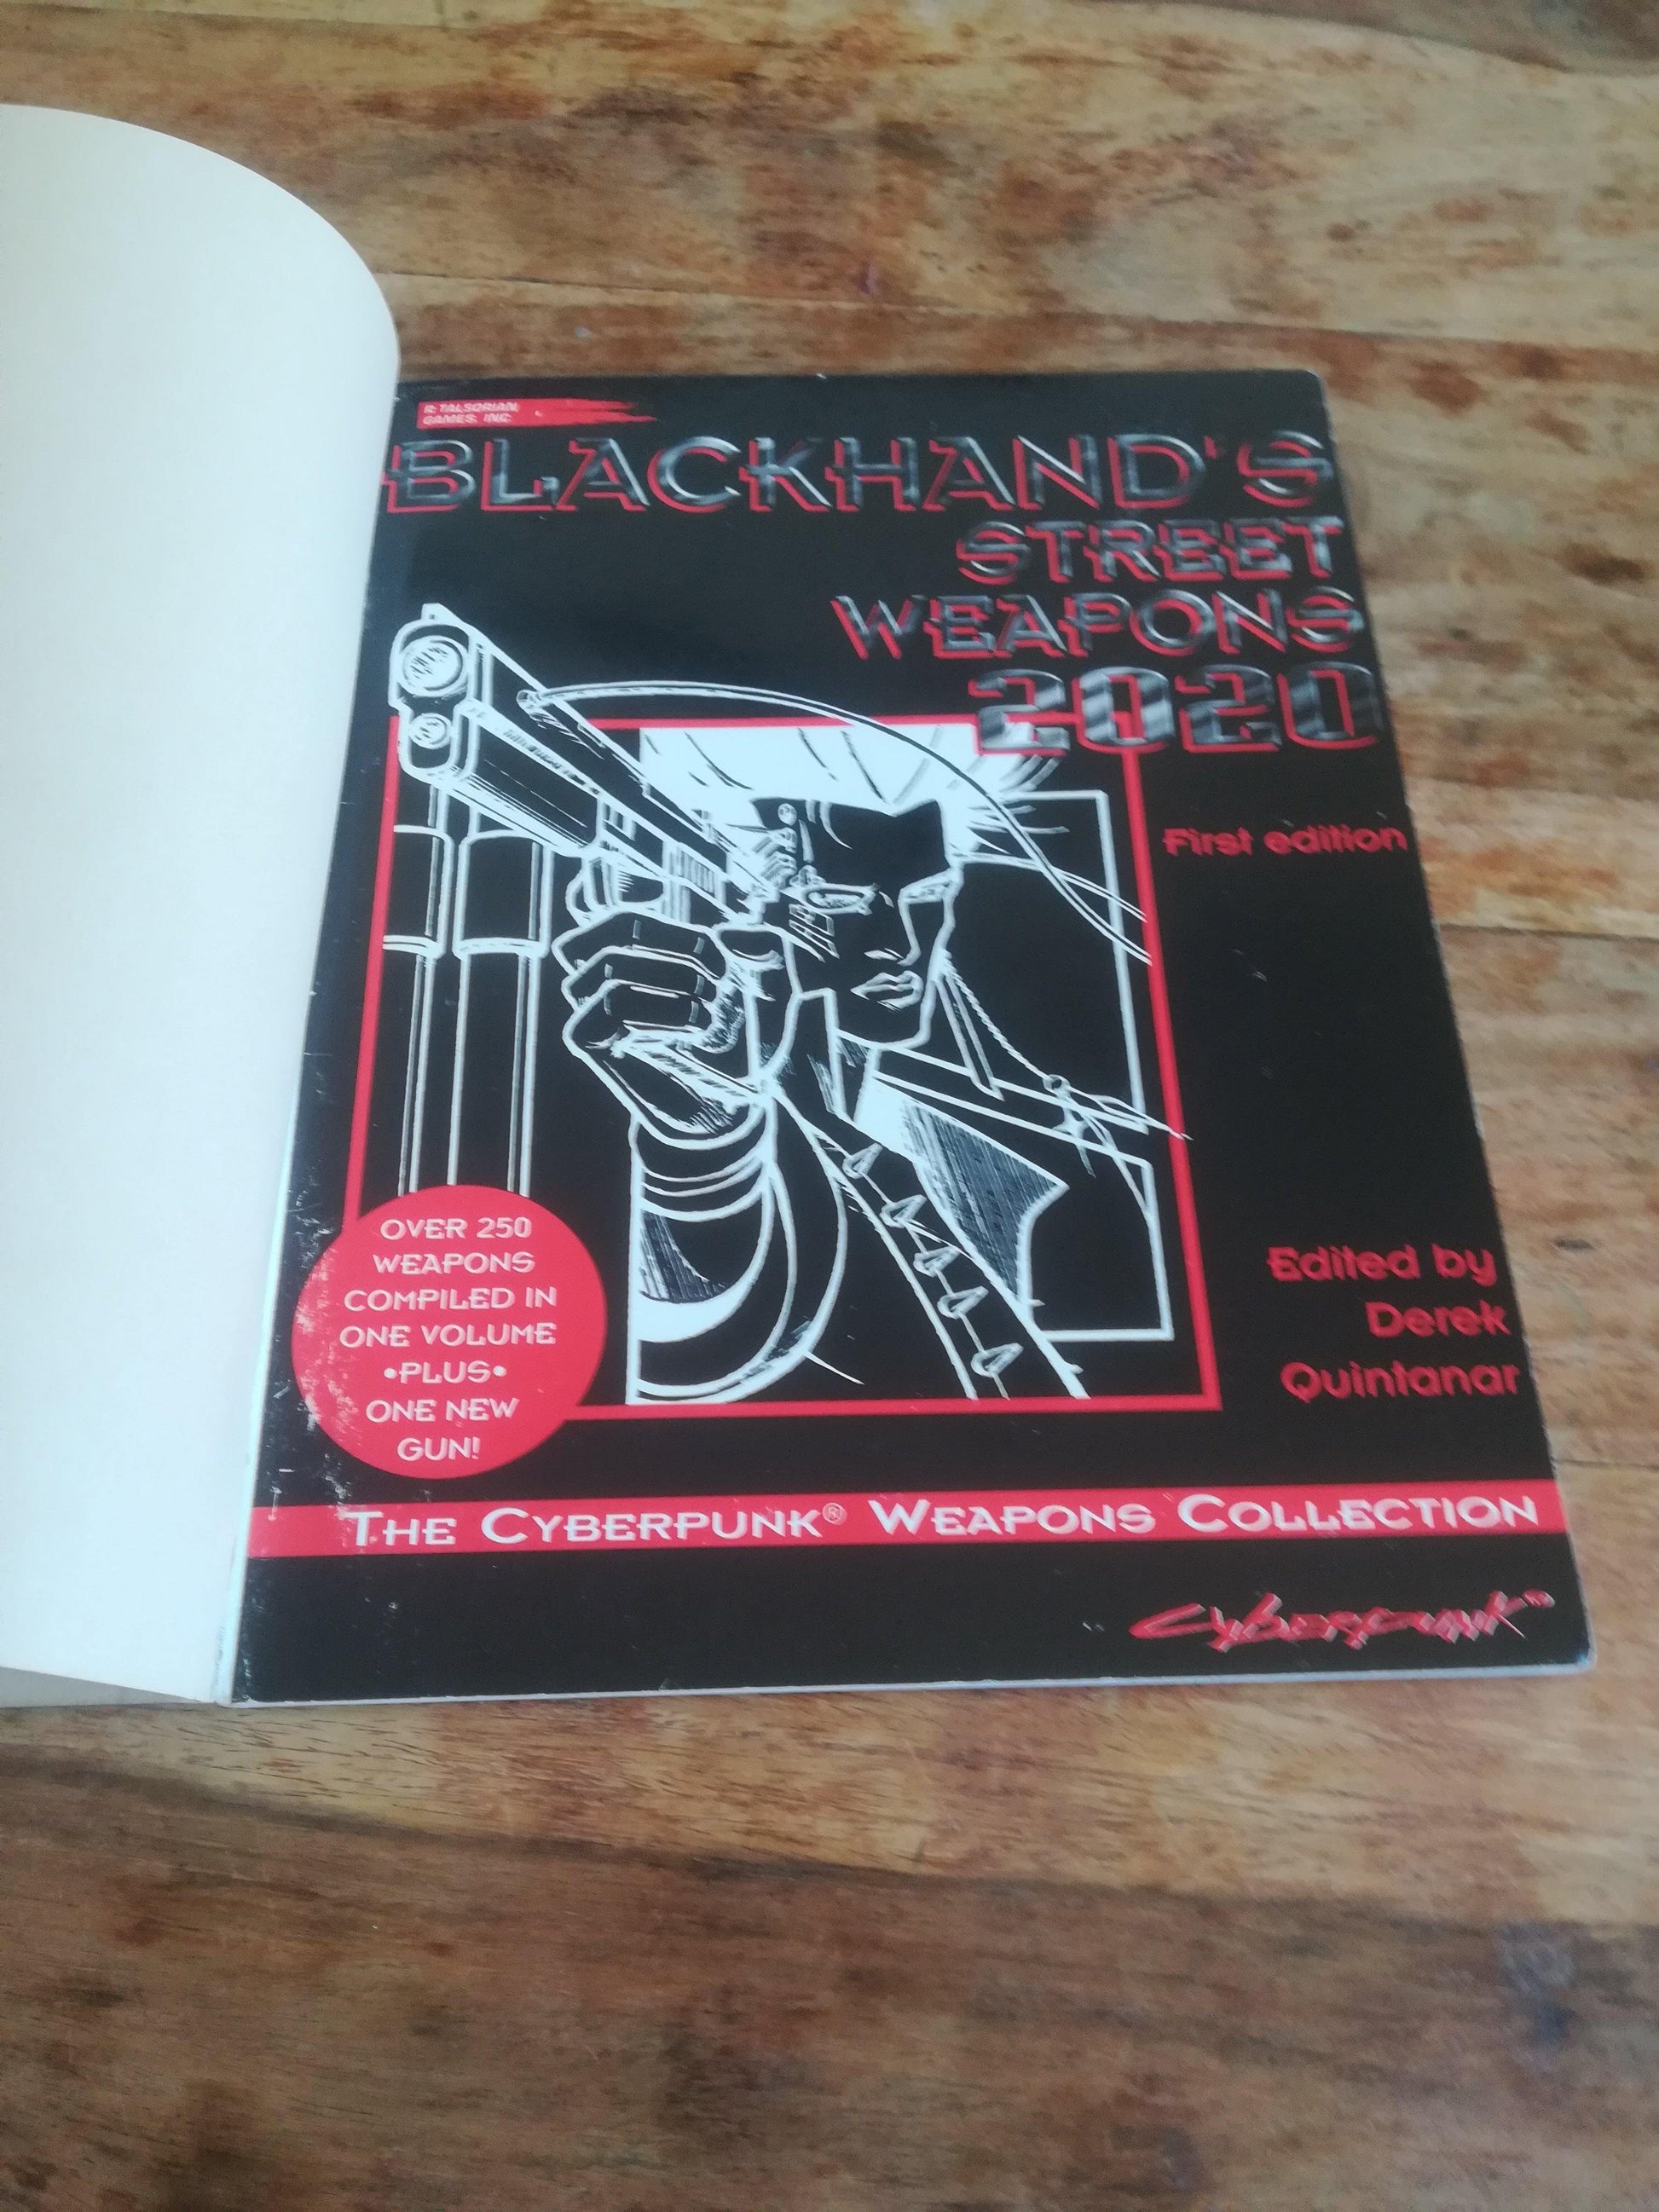 THE CYBERPUNK BLACKHAND'S STREET WEAPONS 2020-First edition- WEAPONS COLLECTION - AllRoleplaying.com